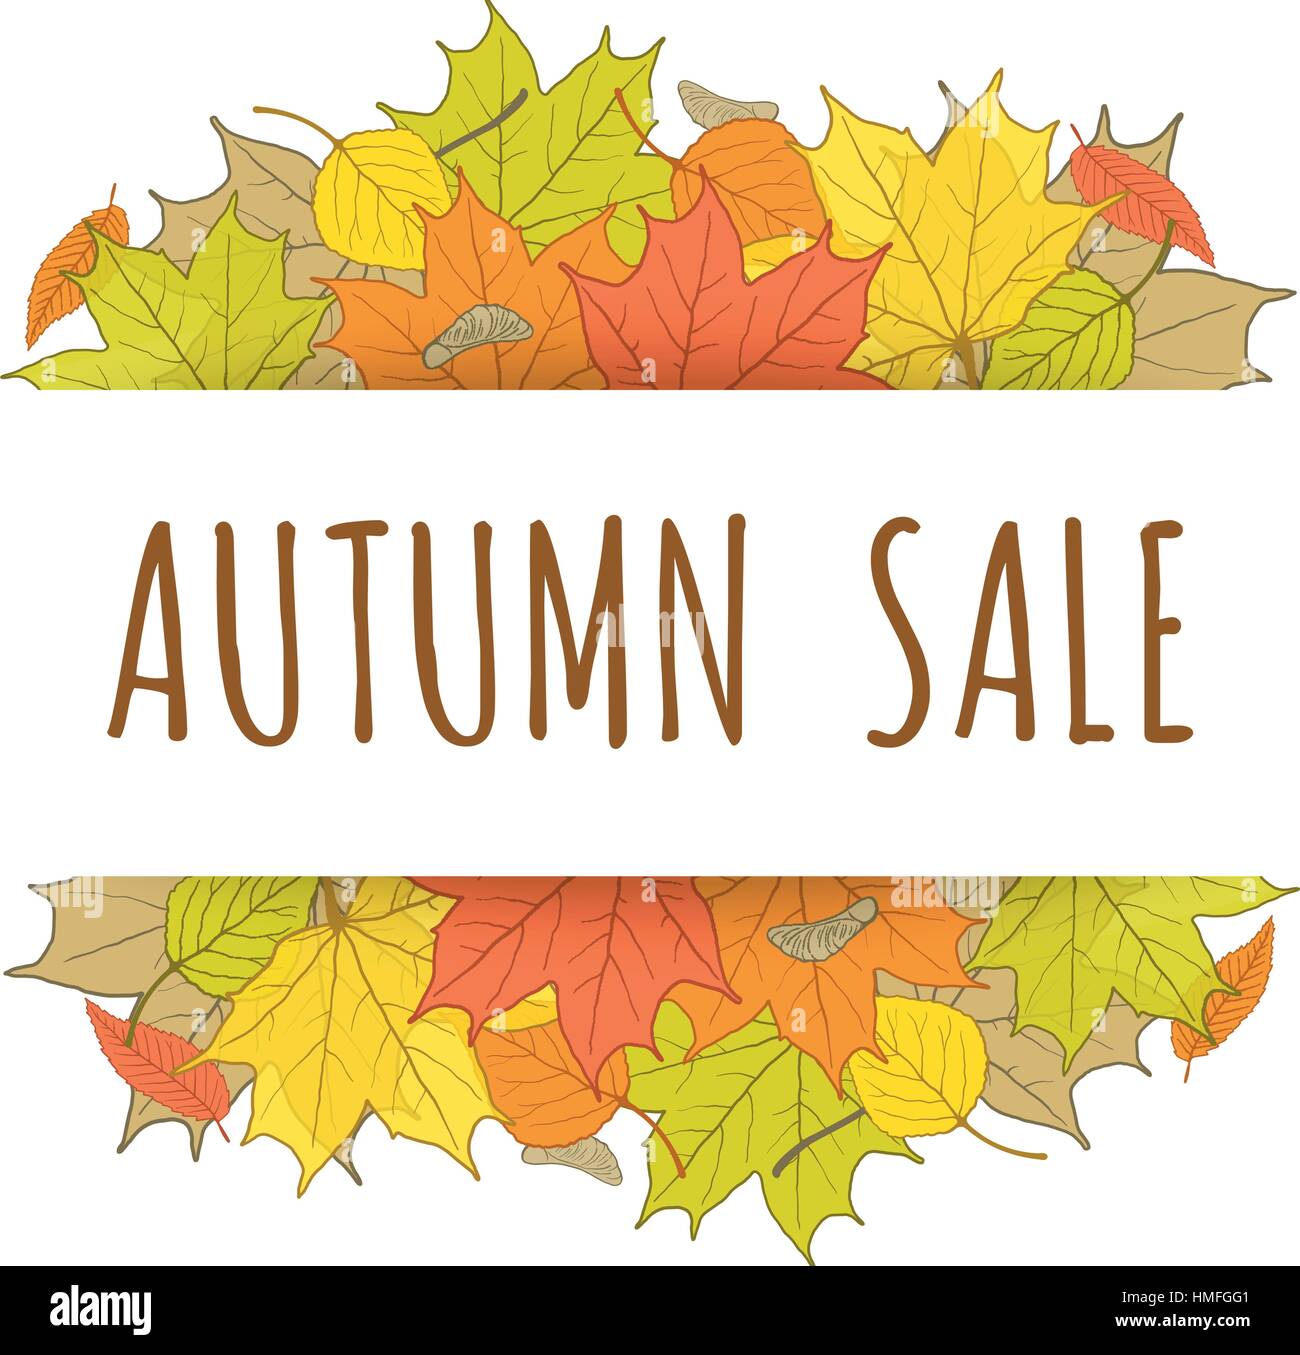 Autumn sale label with hand drawn fallen leaves. Fall seasonal promotional header with text. Vector sketch border for flyer or special offer of shop o Stock Vector